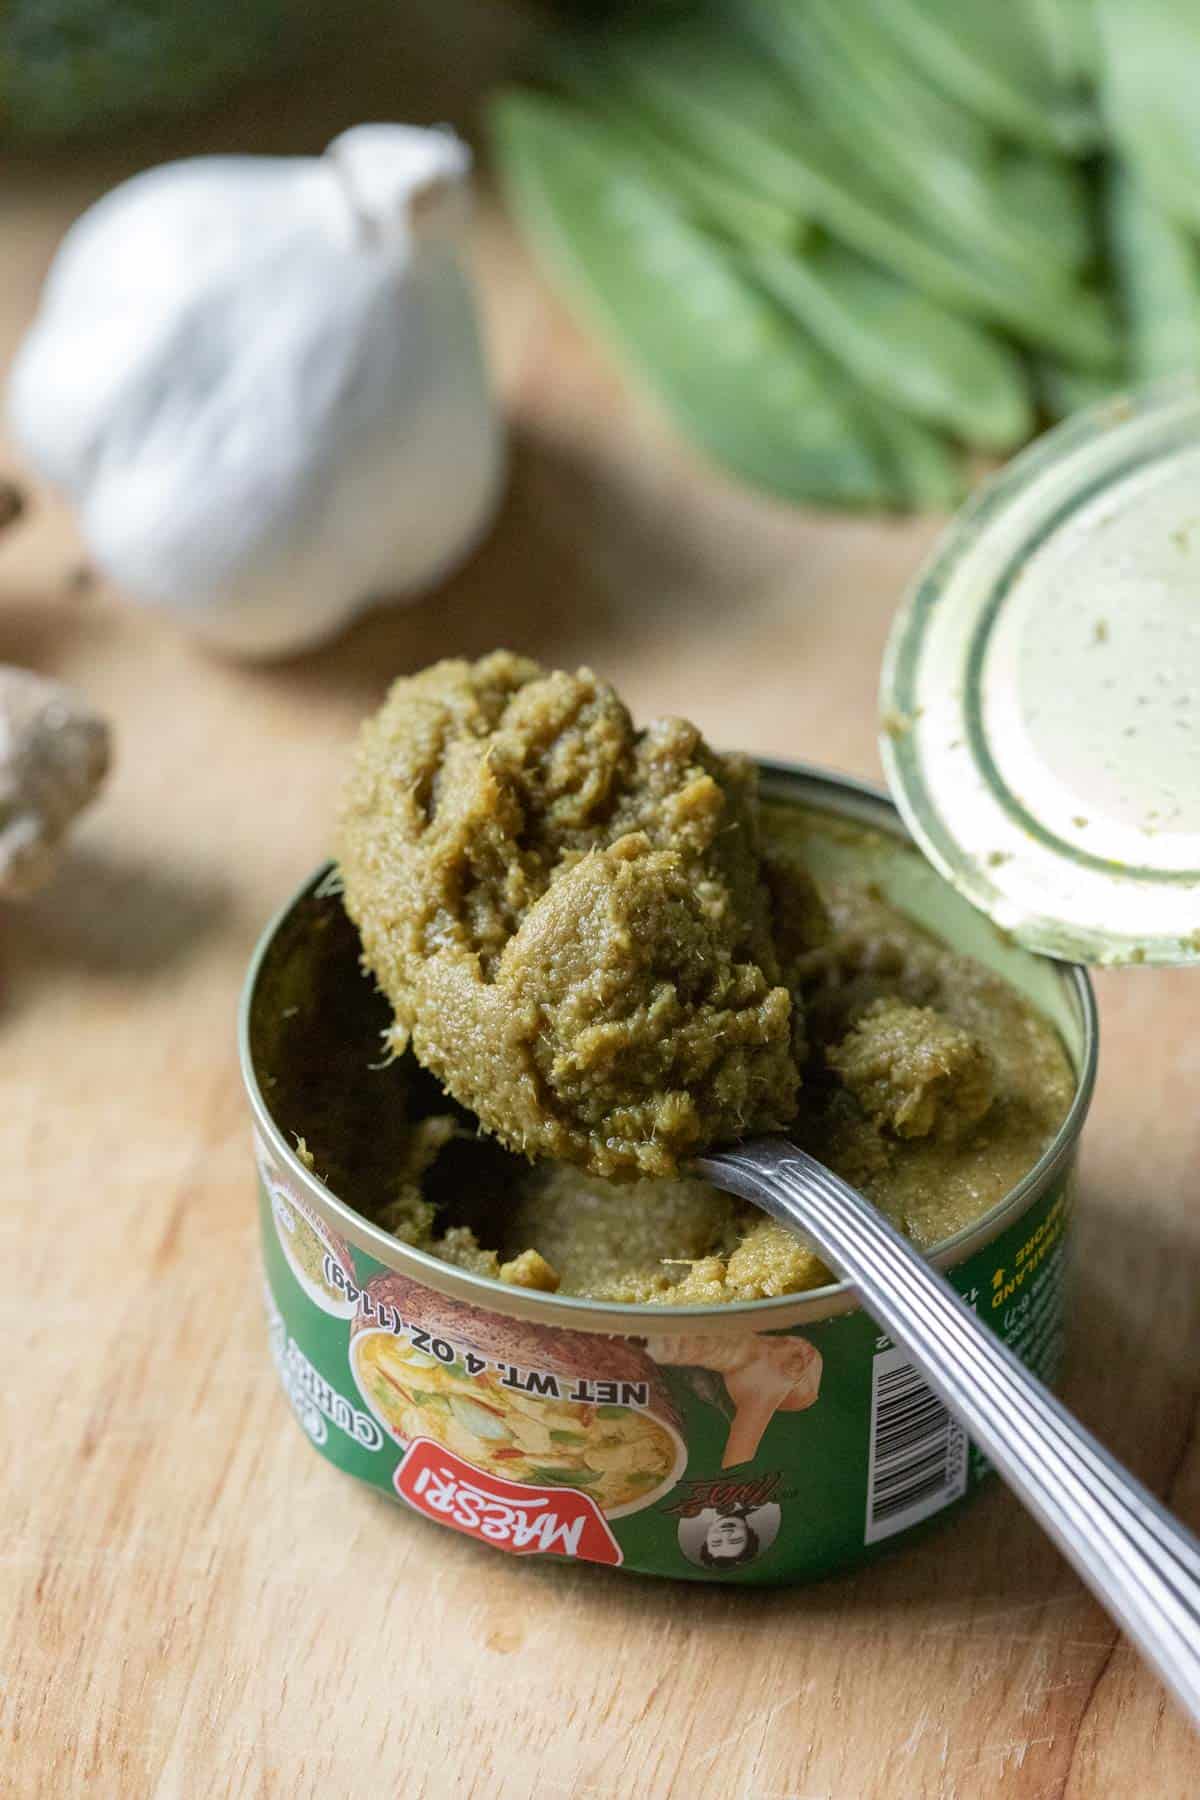 a spoon scooping up Maesri brand Thai green curry paste from a can.